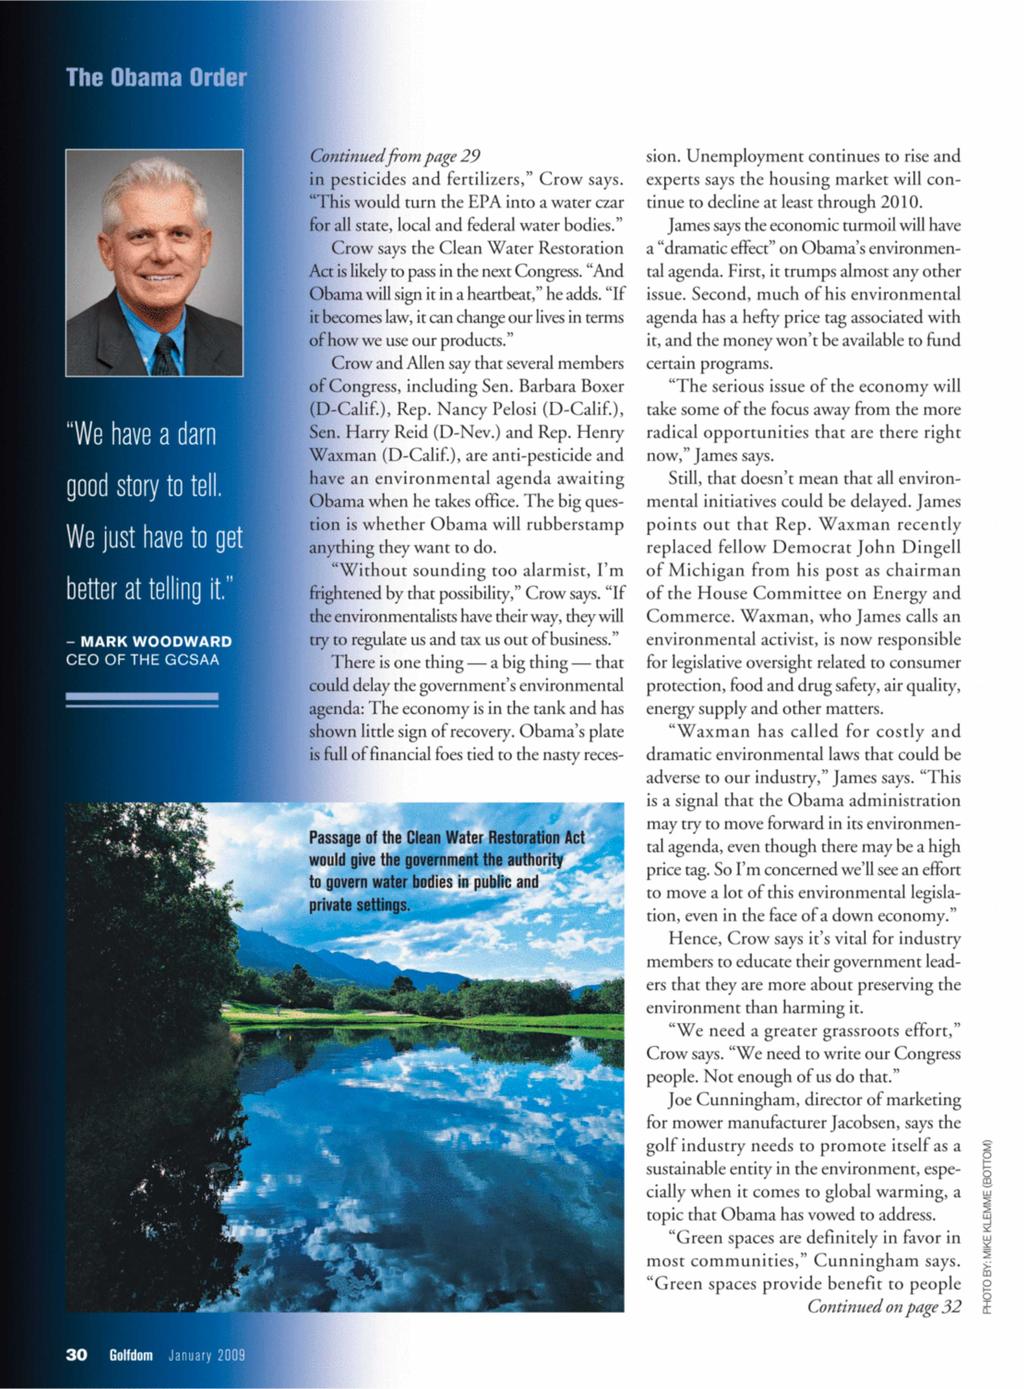 The Obama Order "We have a darn good story to tell. We just have to get better at telling it." - MARK WOODWARD CEO OF THE GCSAA Continued from page 29 in pcsticides and fertilizers," Crow says.